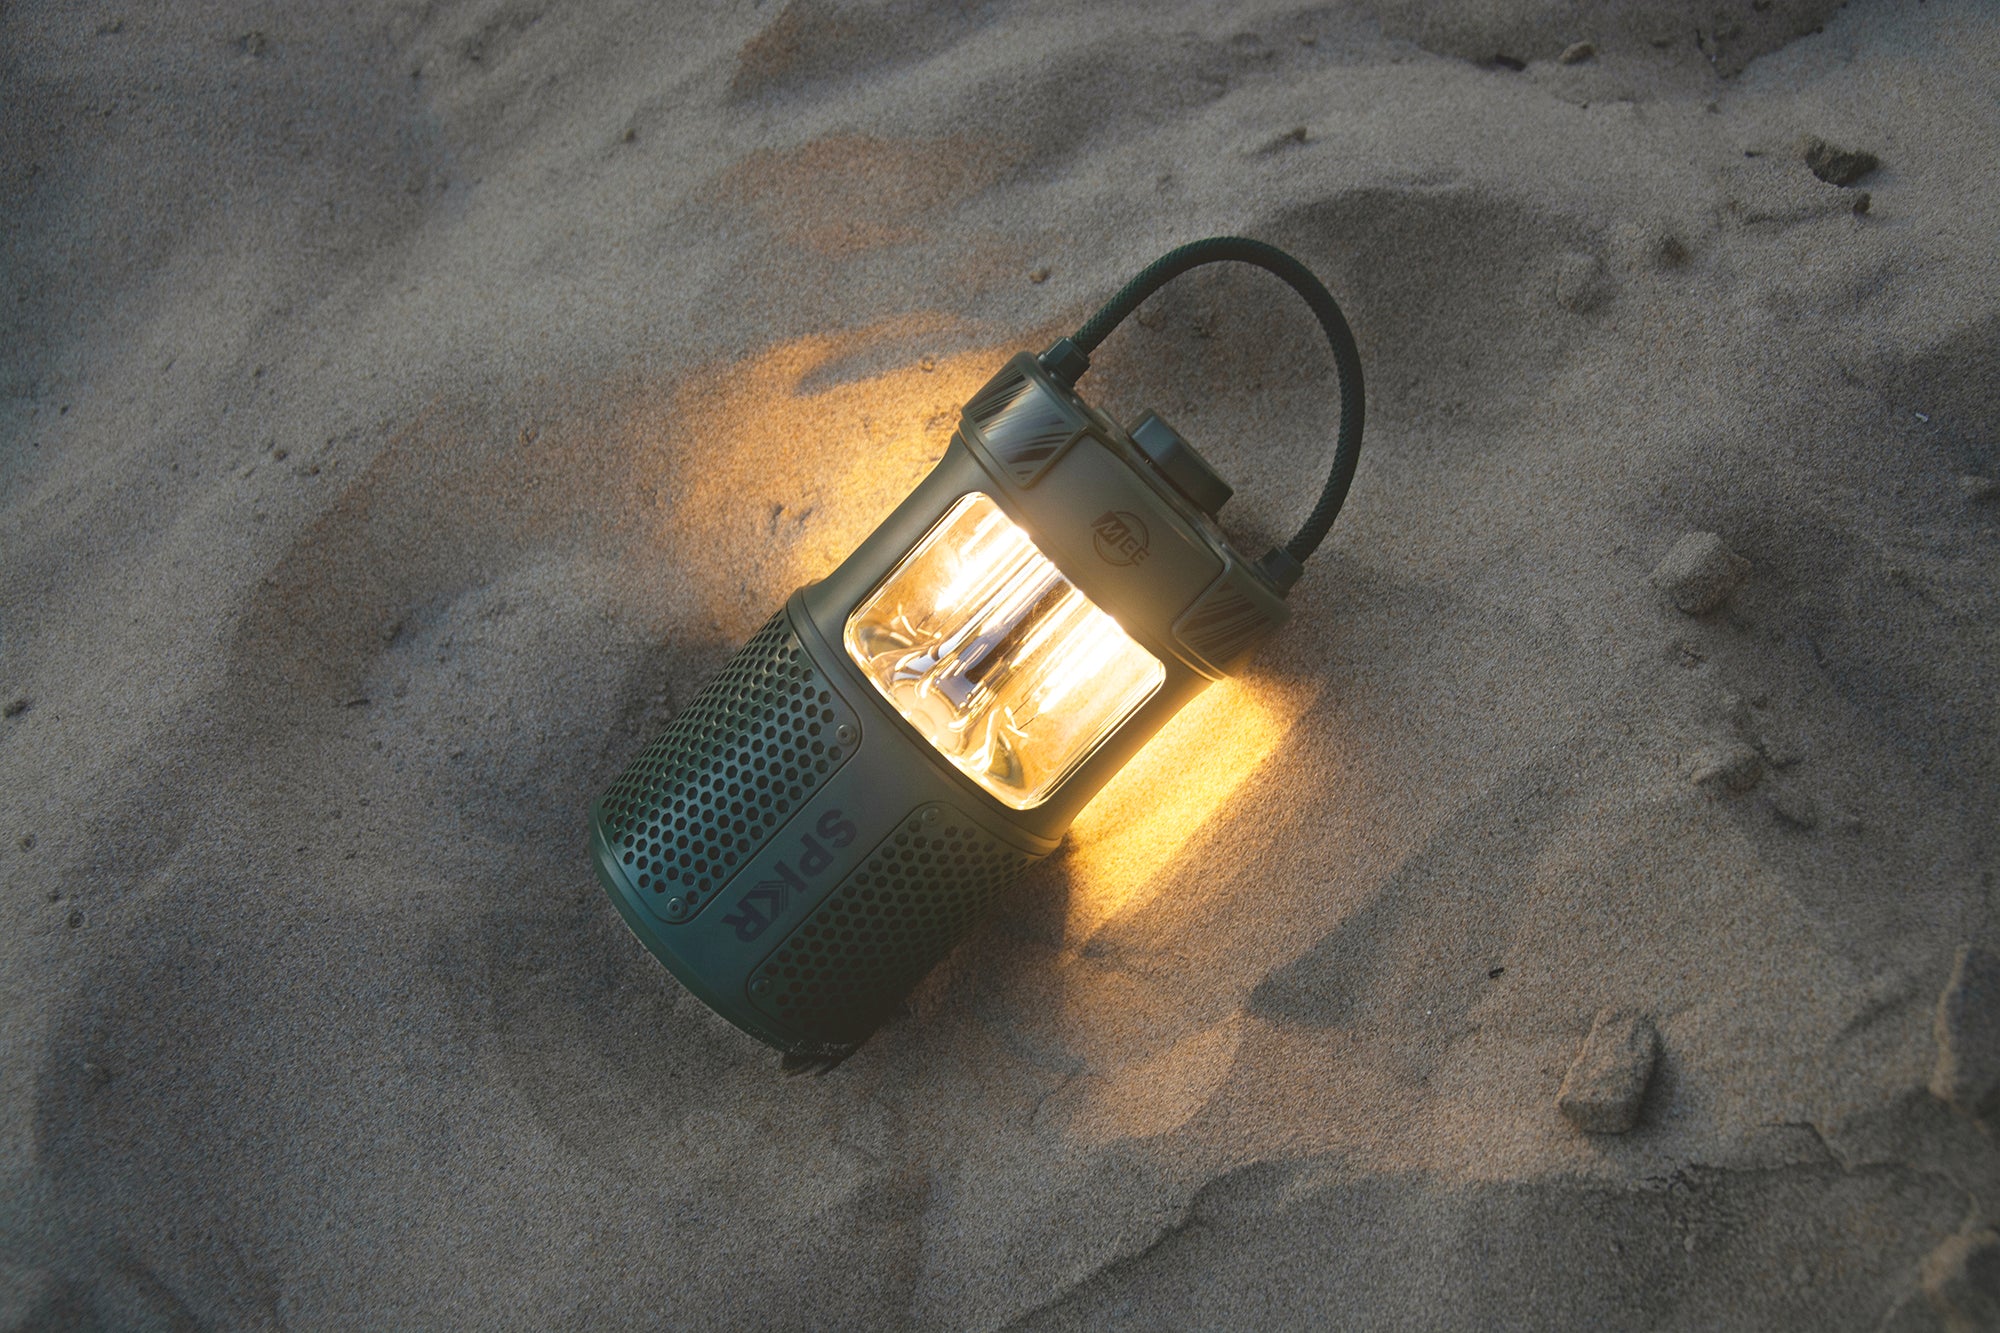 A glowing lantern sits on sandy beach soil, casting a warm light during dusk, highlighting the intricate design and the brand label on its side.